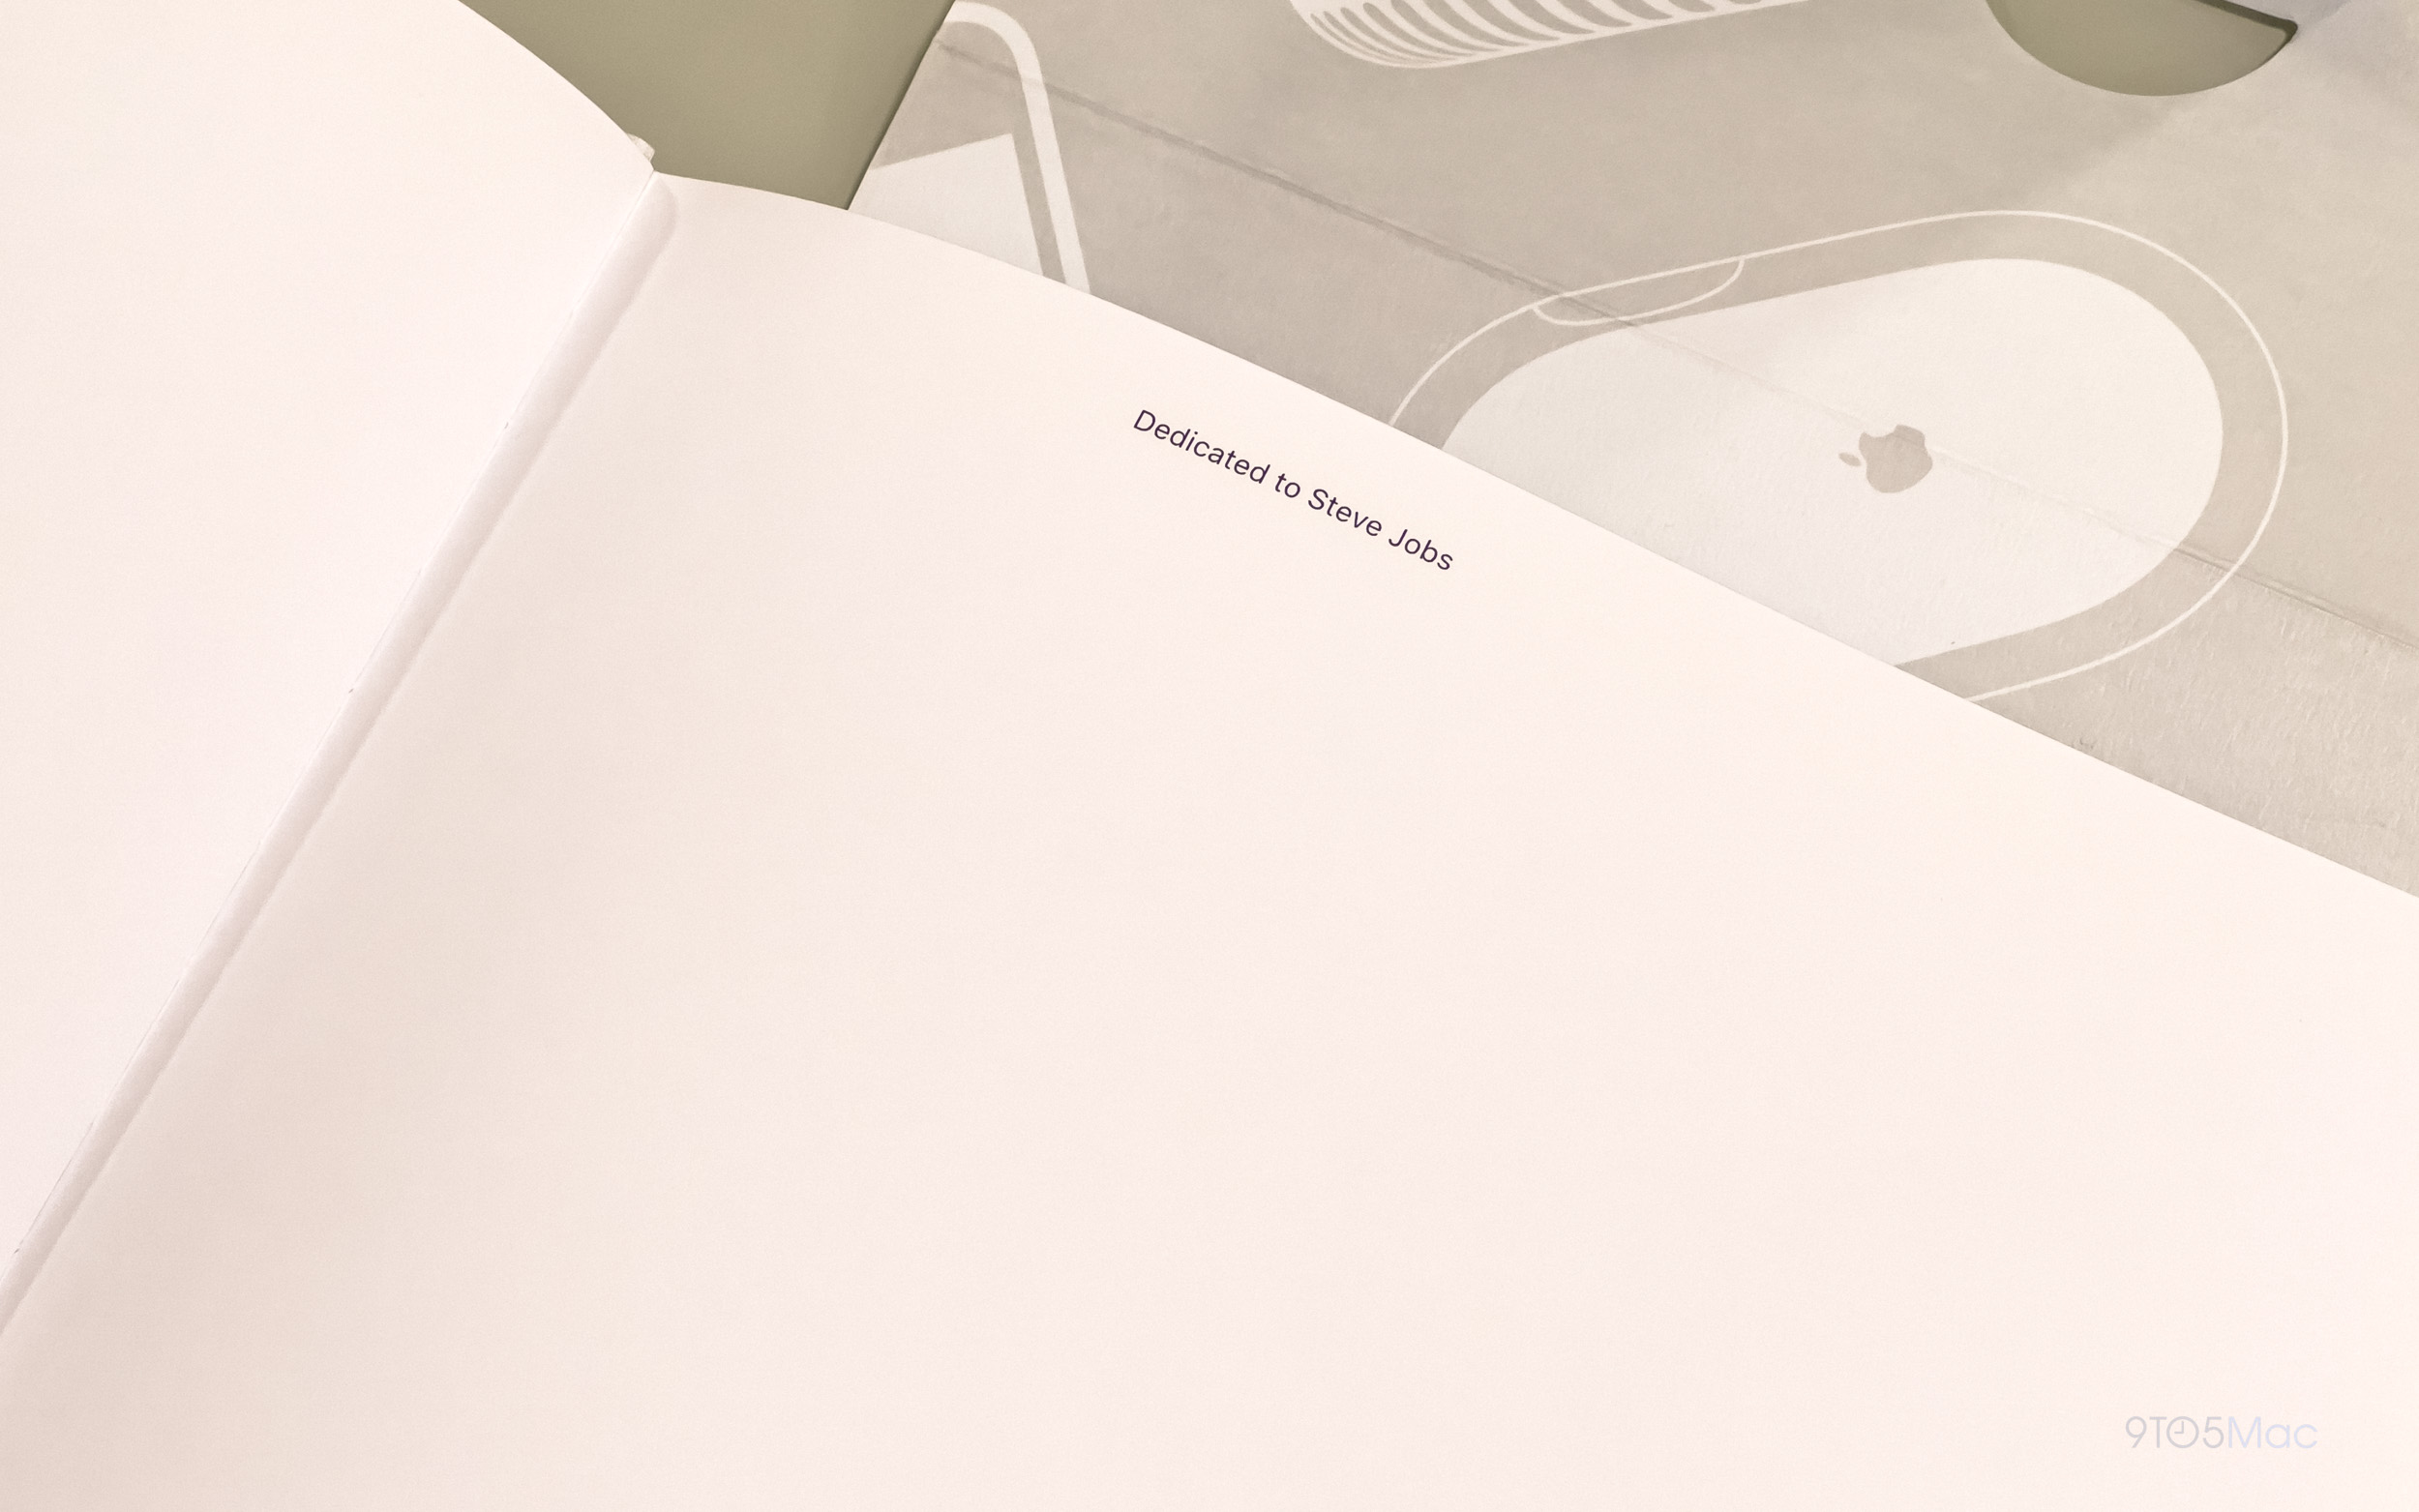 Three years ago, Apple stopped selling Jony Ive's book Designed by Apple in California.